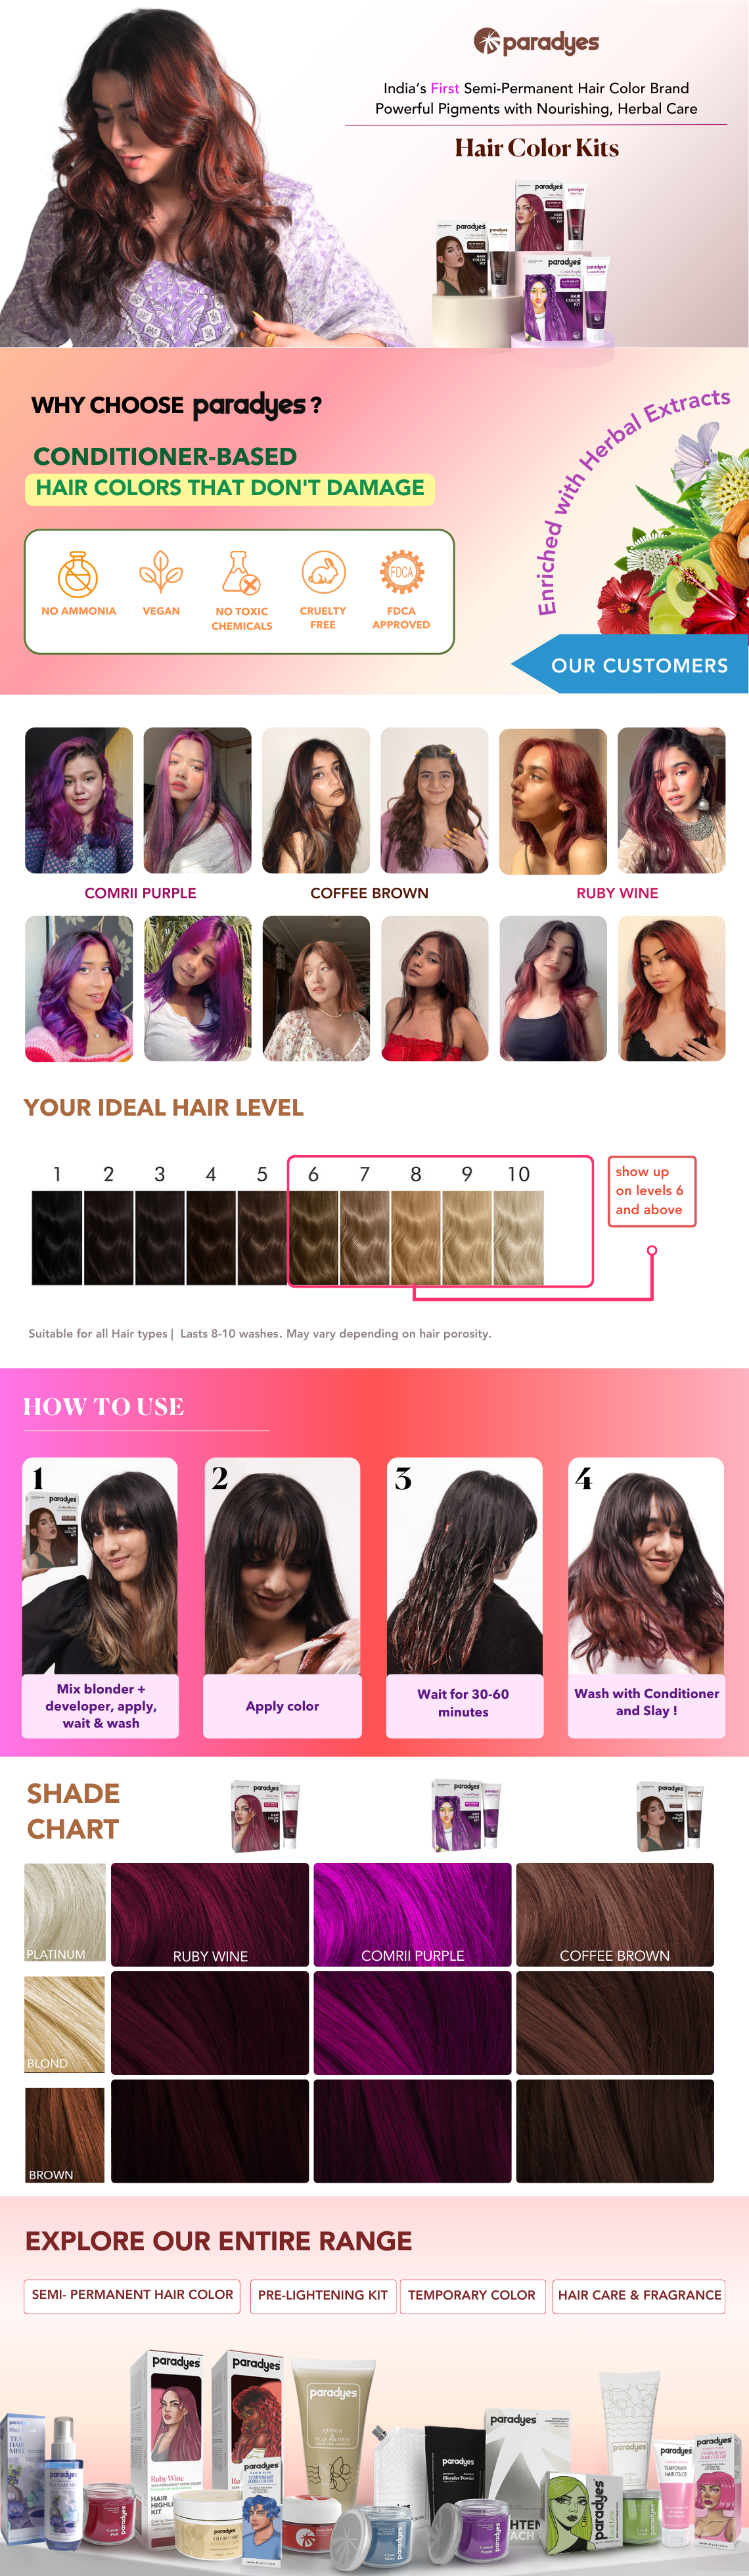 Coffee Brown Hair Color Kit | Lasts 8+ washes